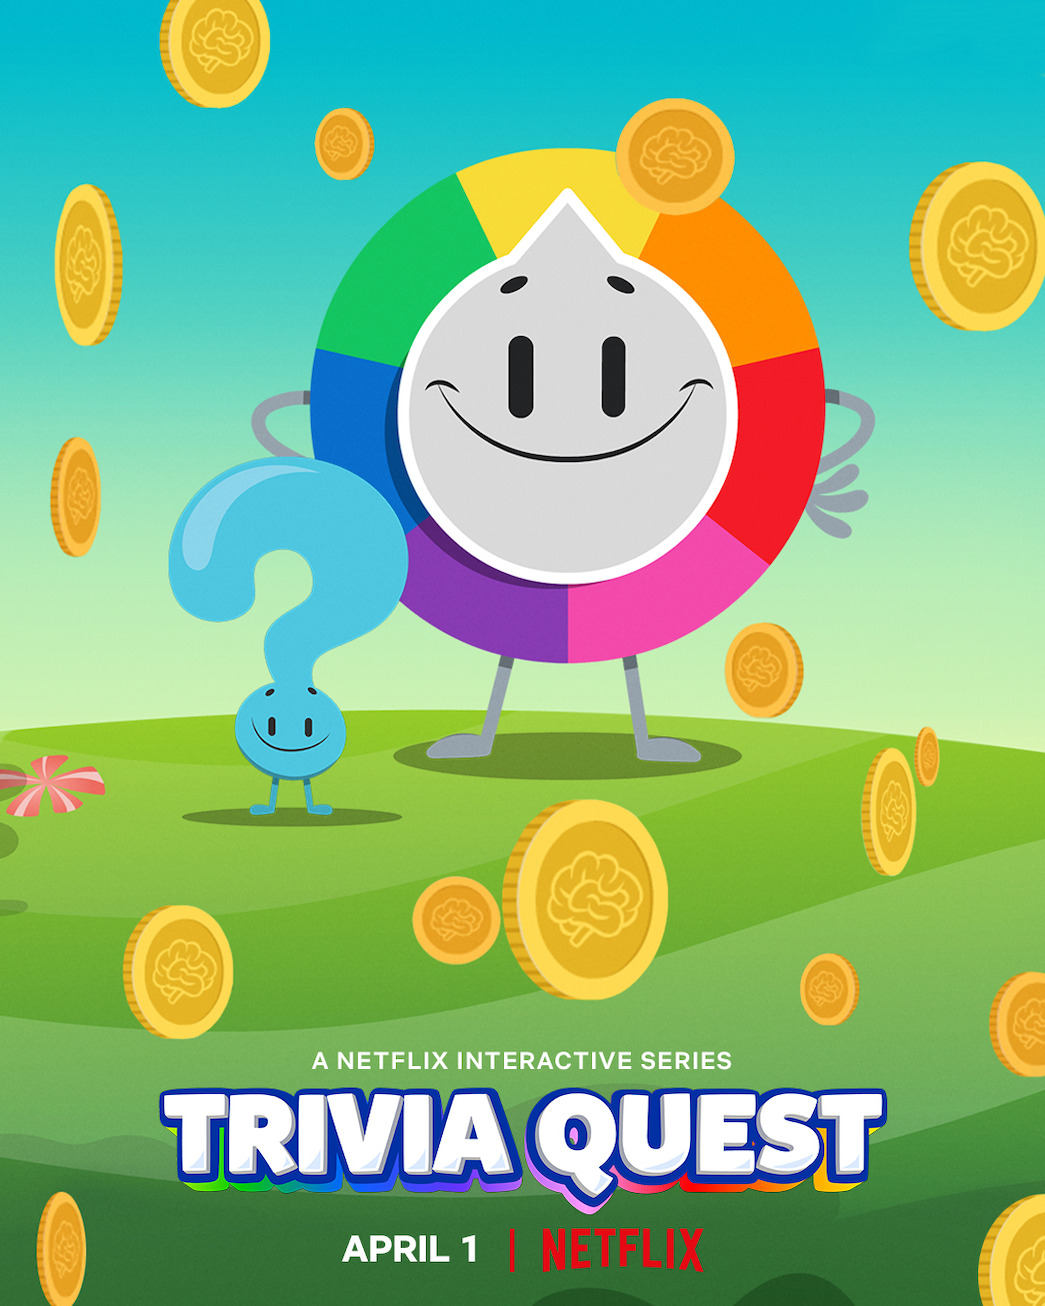 Quiz Time! An Interactive ‘Trivia Quest’ Is Coming in April